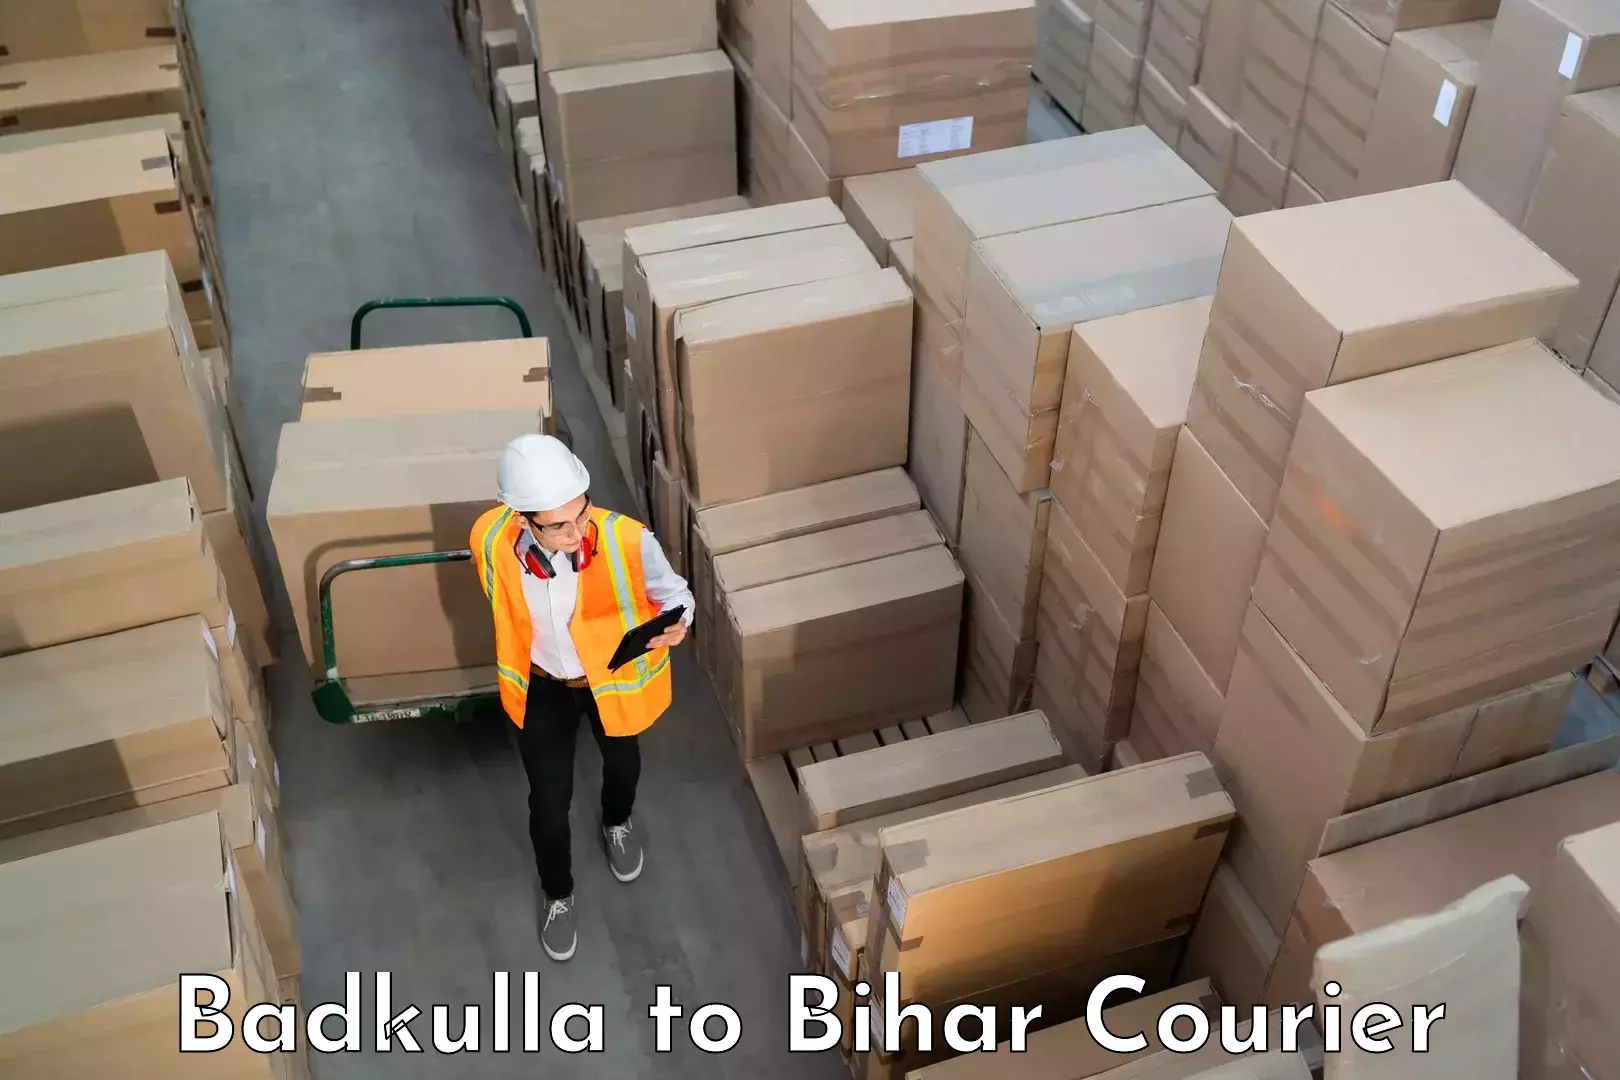 Baggage delivery management in Badkulla to Singhia